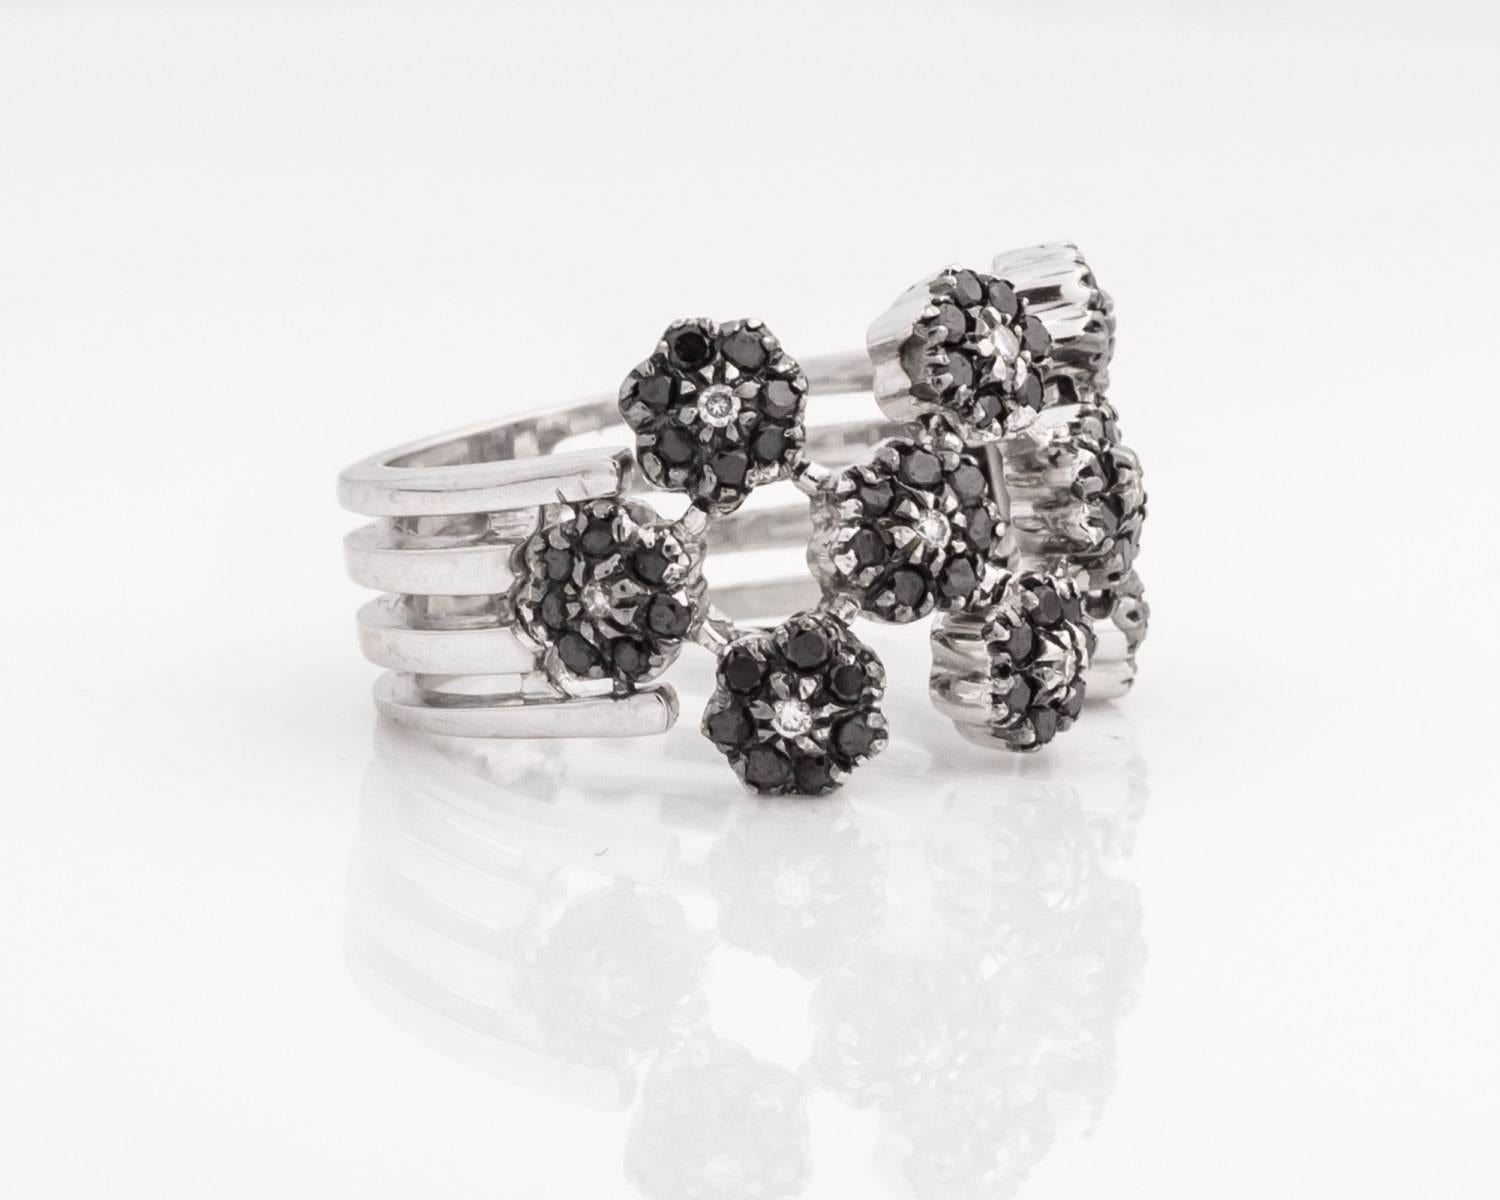 High Quality 18 Karat White Gold Diamond Ring 
Features Black and White Diamonds; all black diamonds are AAA quality
Ring Size 7.5 (can be resized)
Italian Made 
2.5 mm thick white gold bezel frame 
Floral Design; flowers are arranged in a